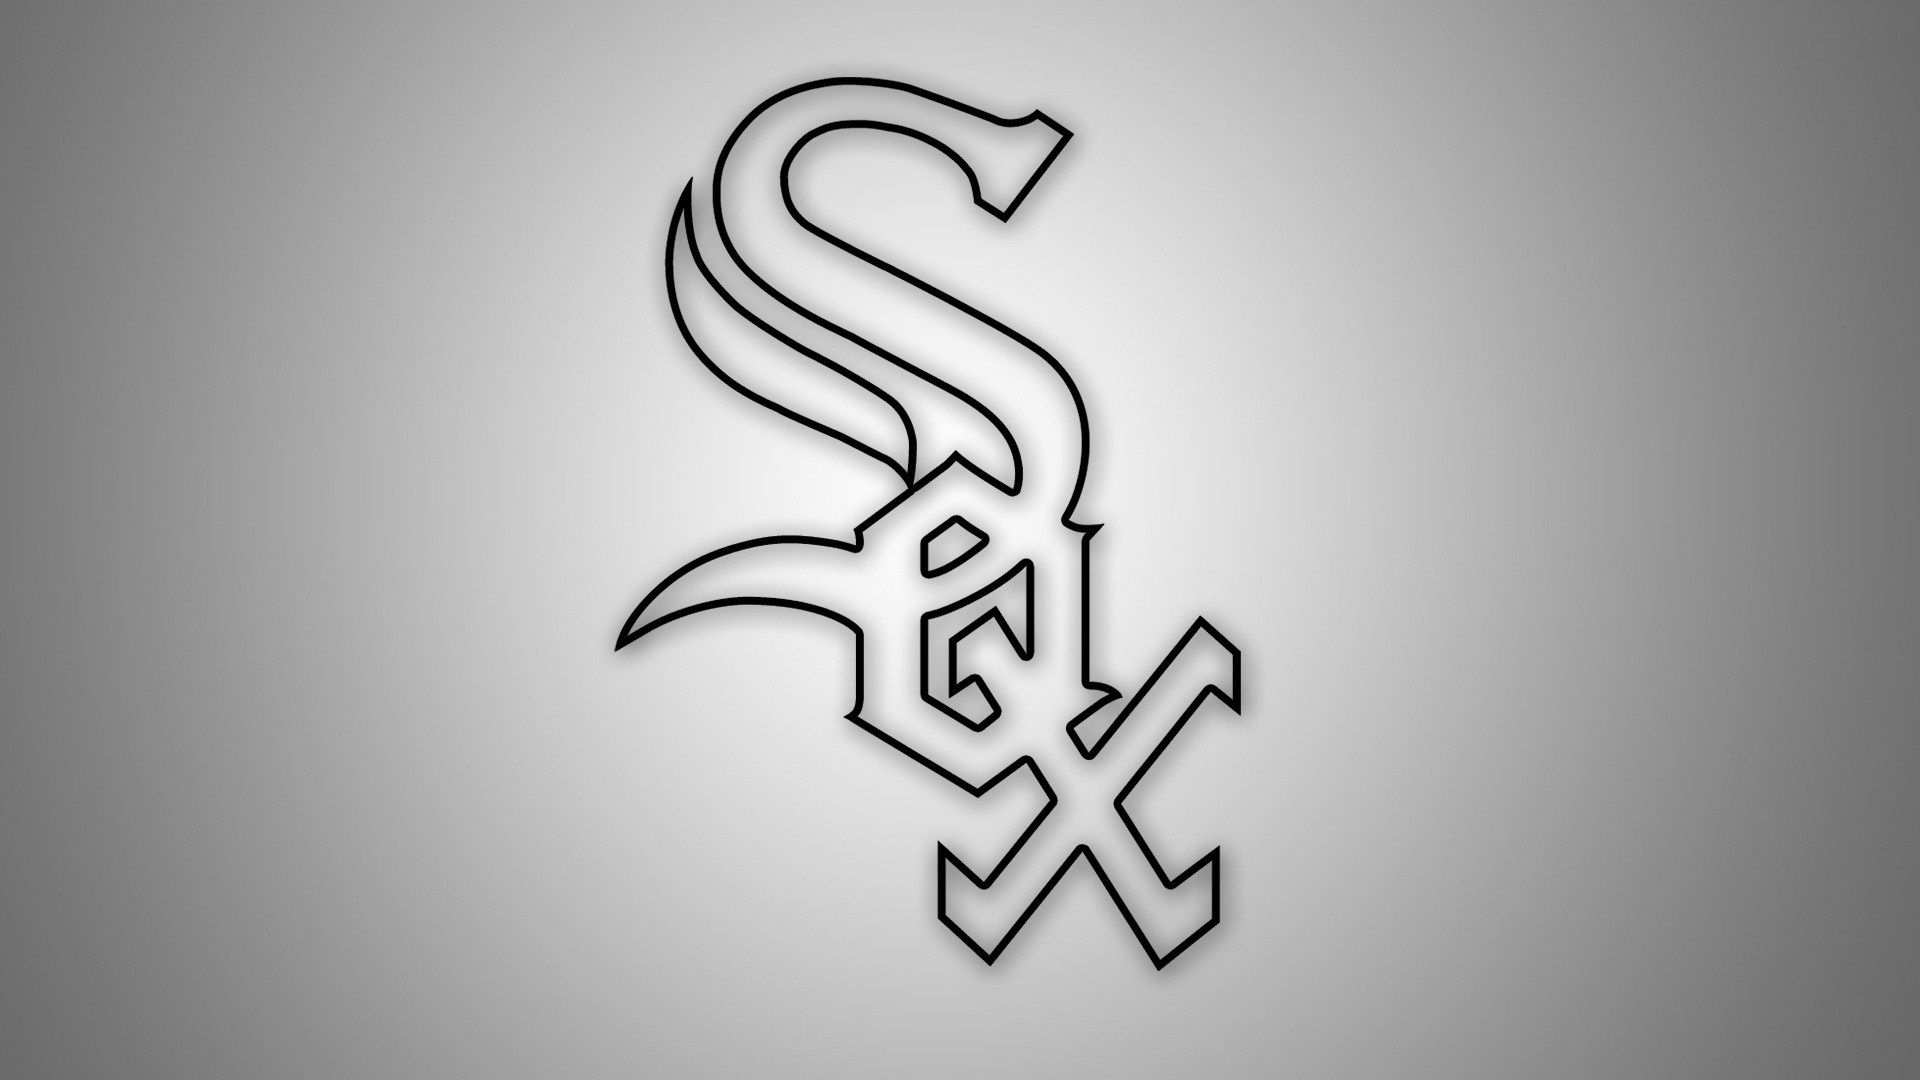 Chicago White Sox Laptop Wallpaper With high-resolution 1920X1080 pixel. You can use this wallpaper for Mac Desktop Wallpaper, Laptop Screensavers, Android Wallpapers, Tablet or iPhone Home Screen and another mobile phone device